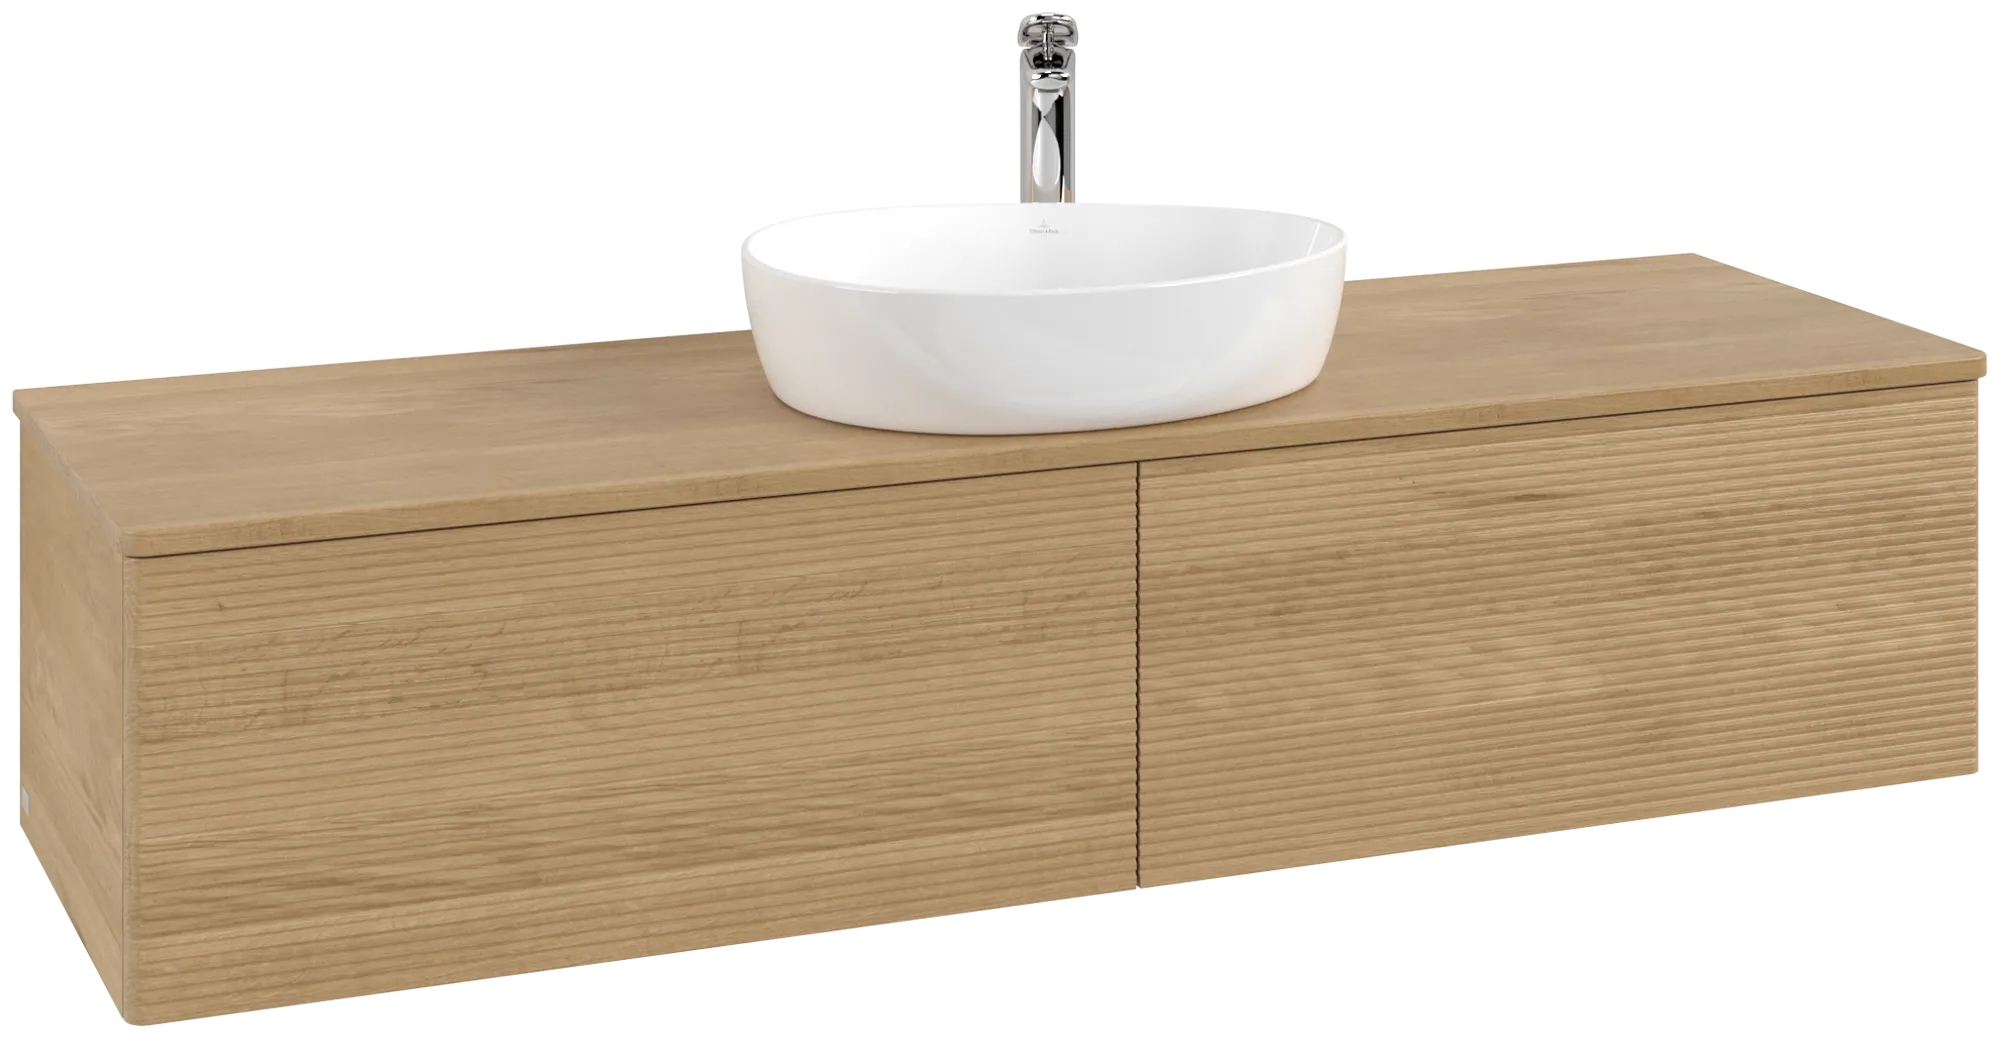 VILLEROY BOCH Antao Vanity unit, with lighting, 2 pull-out compartments, 1600 x 360 x 500 mm, Front with grain texture, Honey Oak / Honey Oak #L36151HN resmi